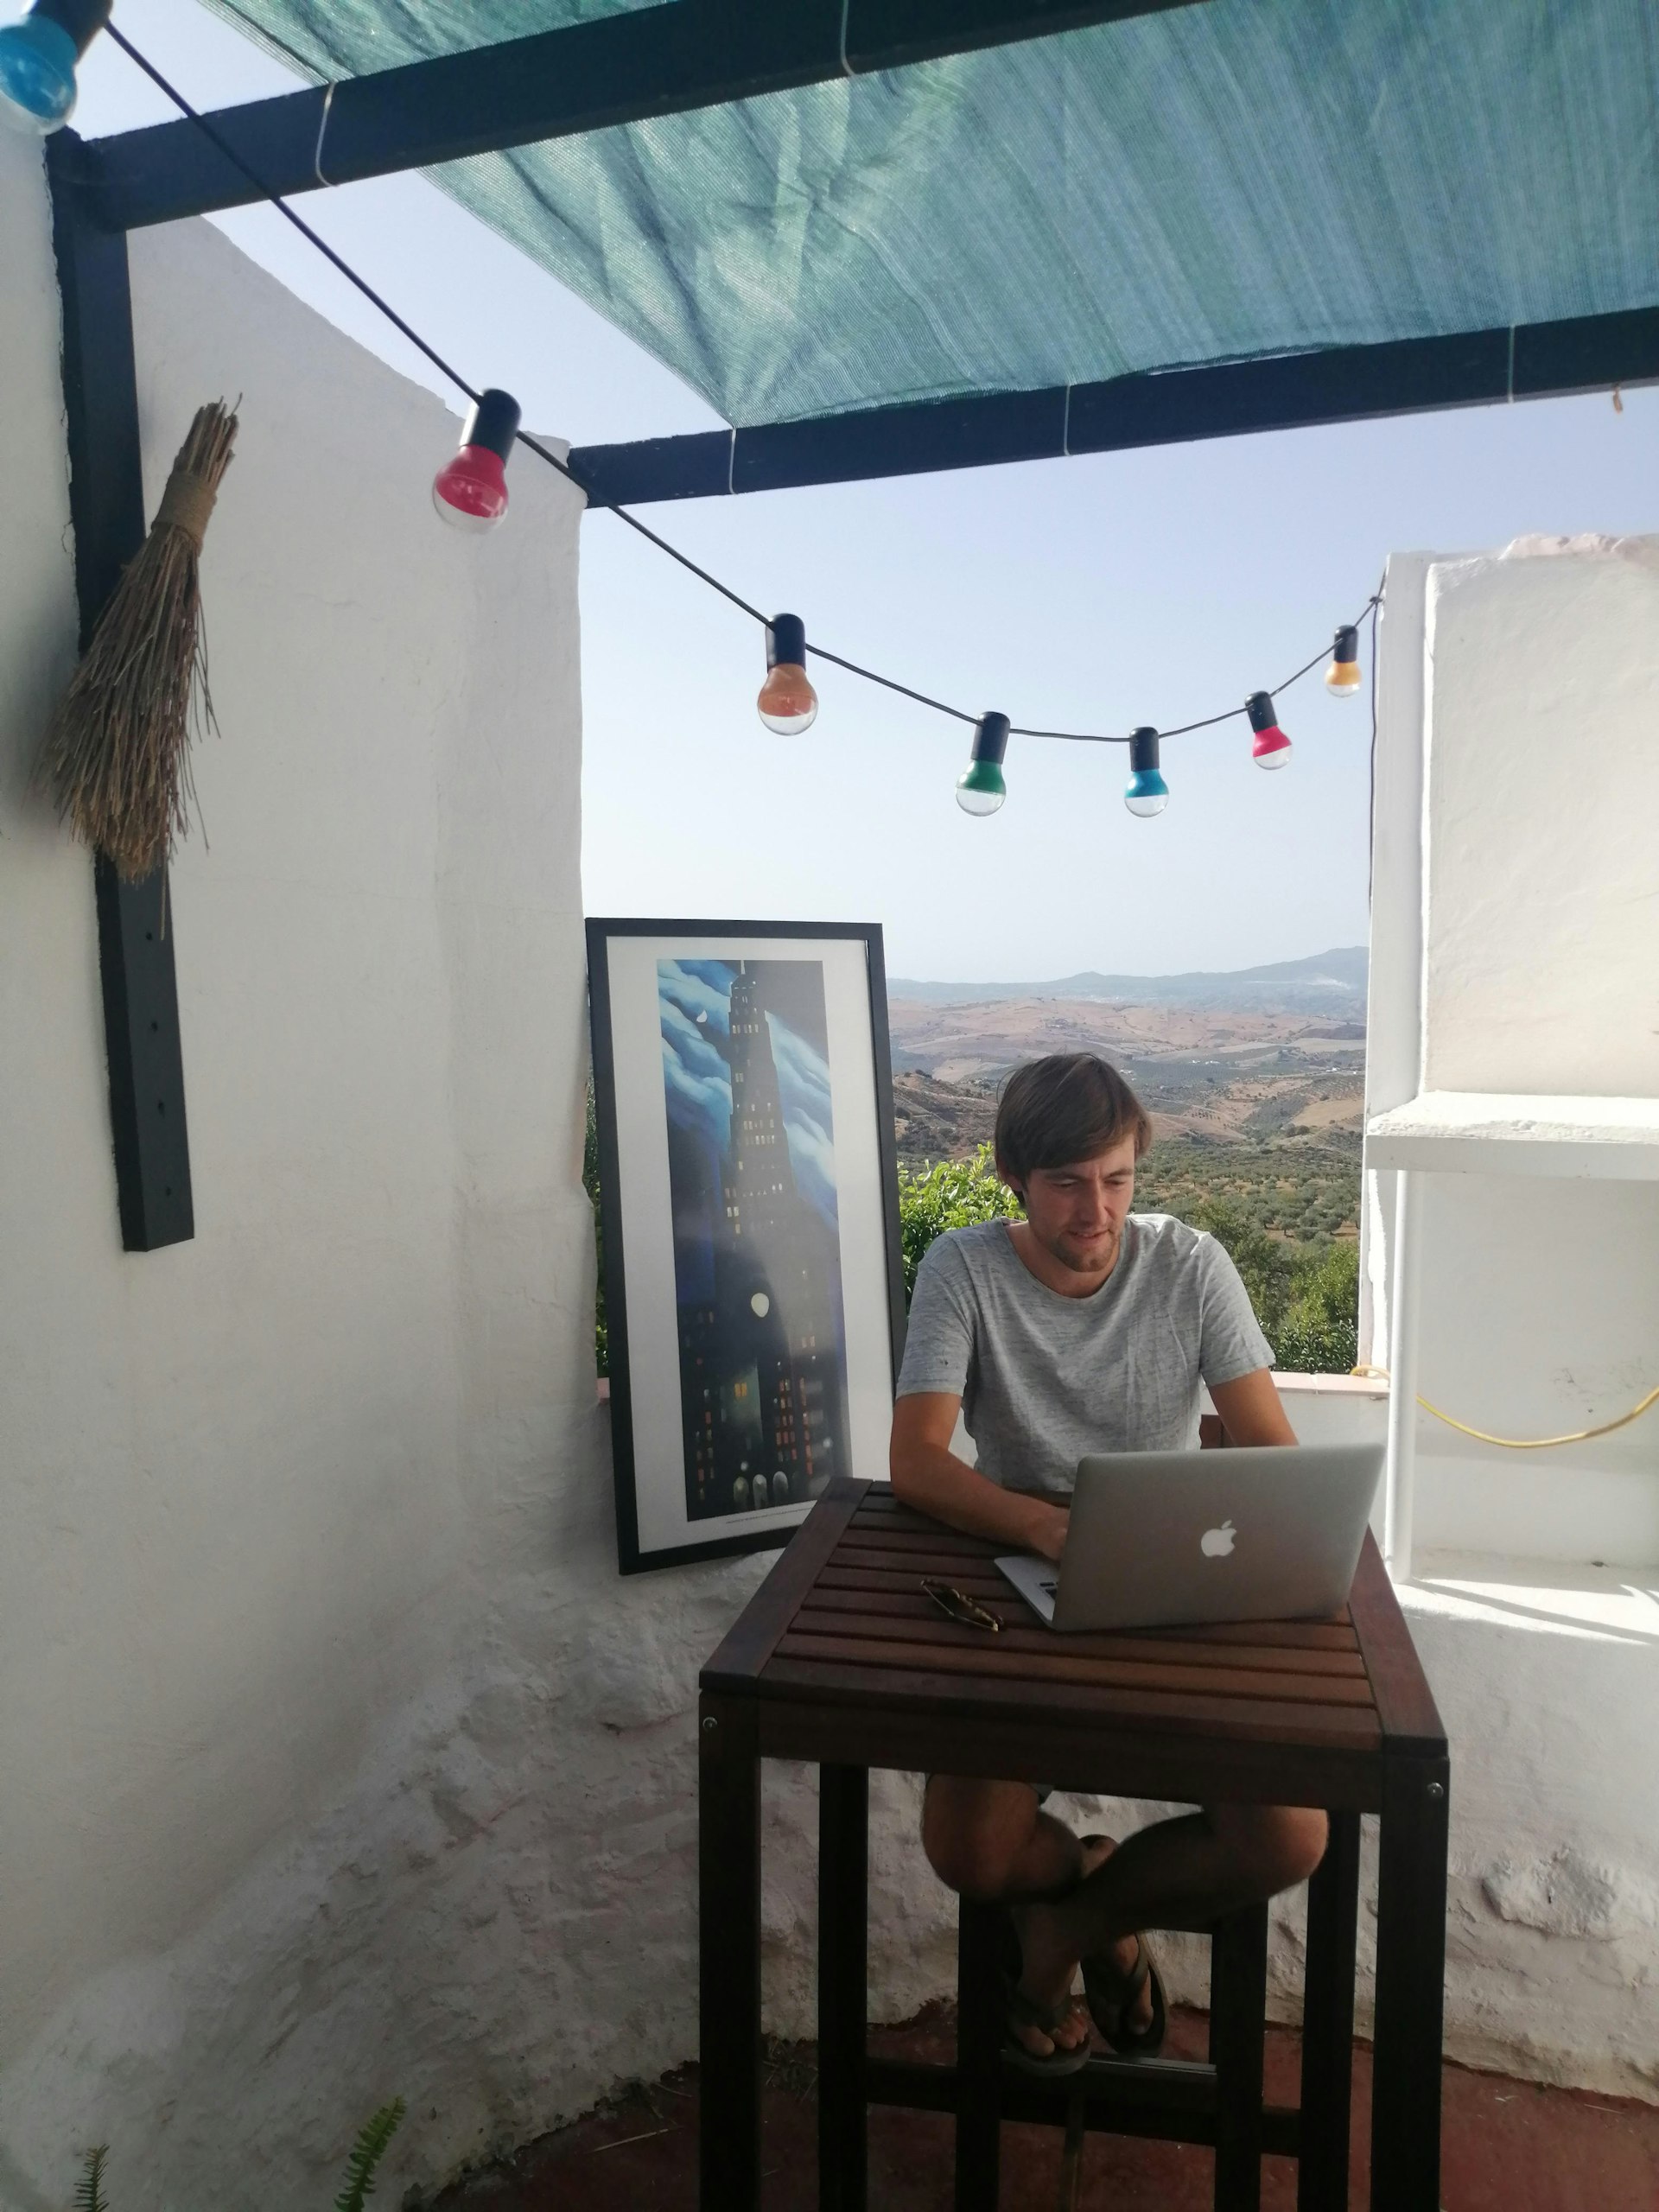 A man sits at a desk with a laptop. Behind him is a stunning view of olive groves. A painting by artist Georgia O'Keeffe is propped against the wall